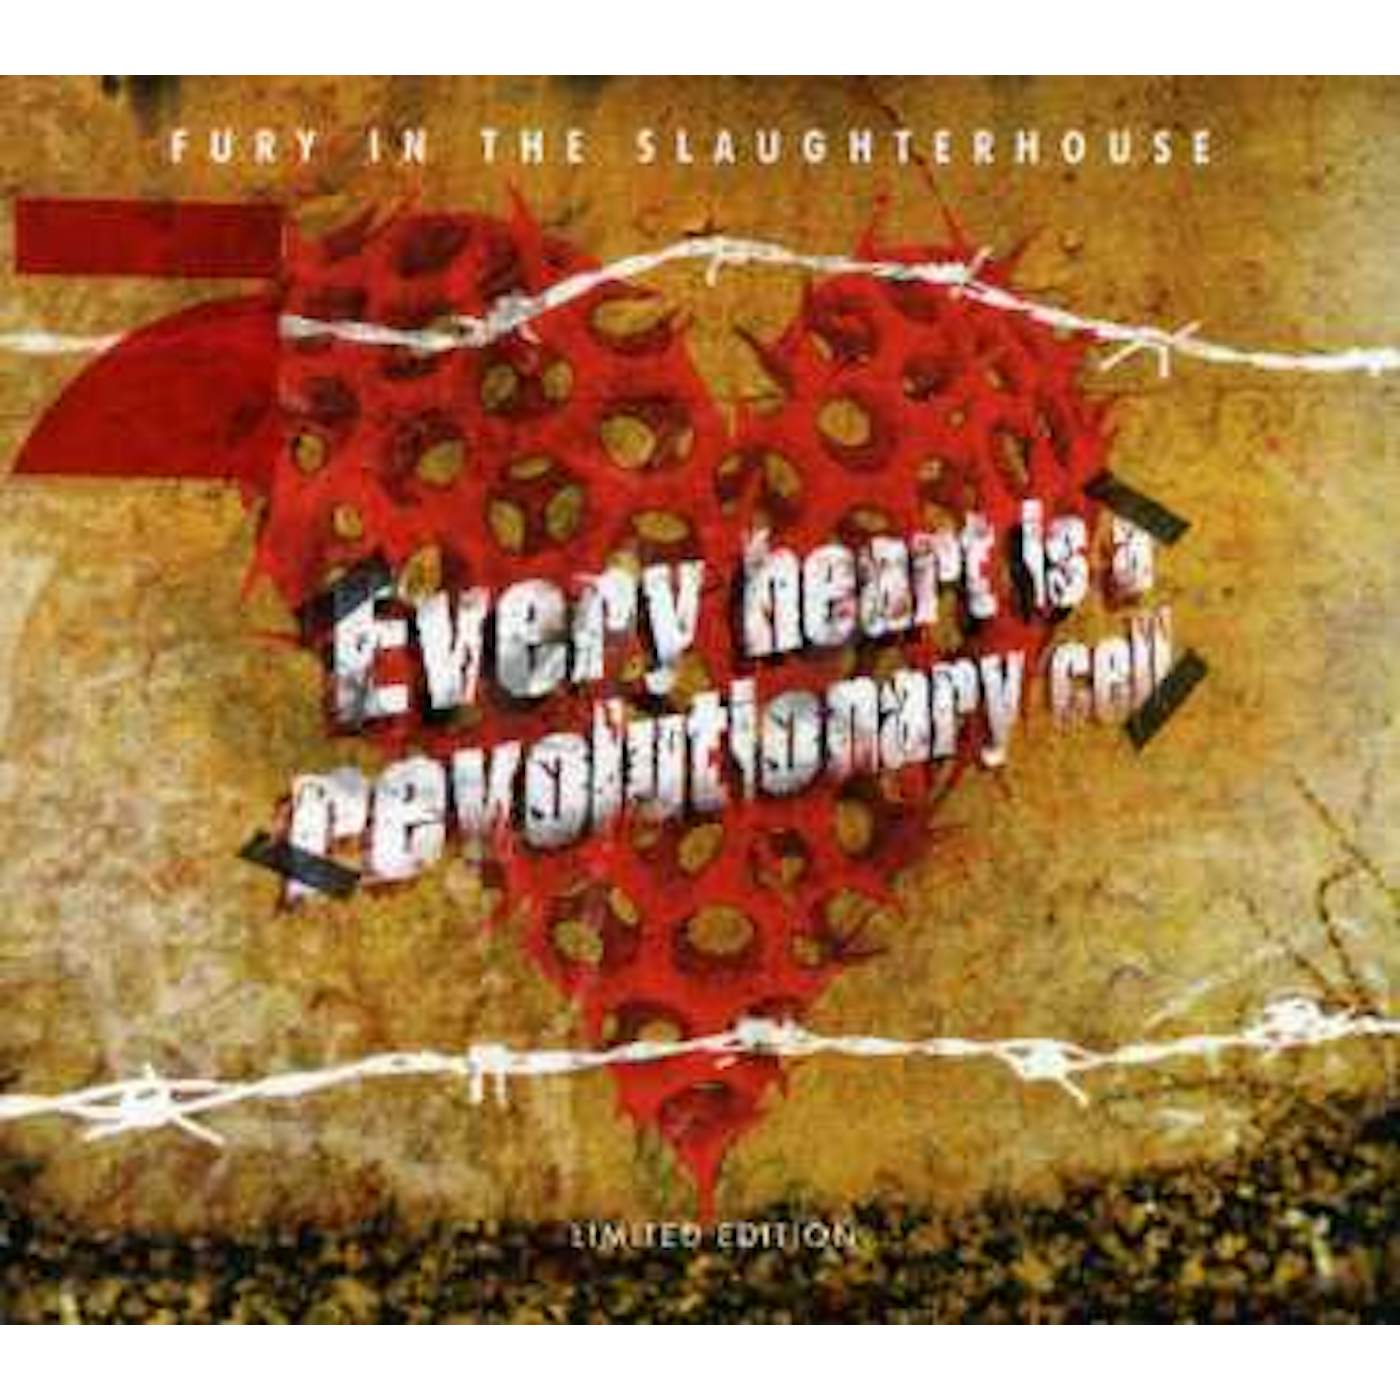 Fury In The Slaughterhouse EVERY HEART IS A REVOLUTIONARY CELL CD